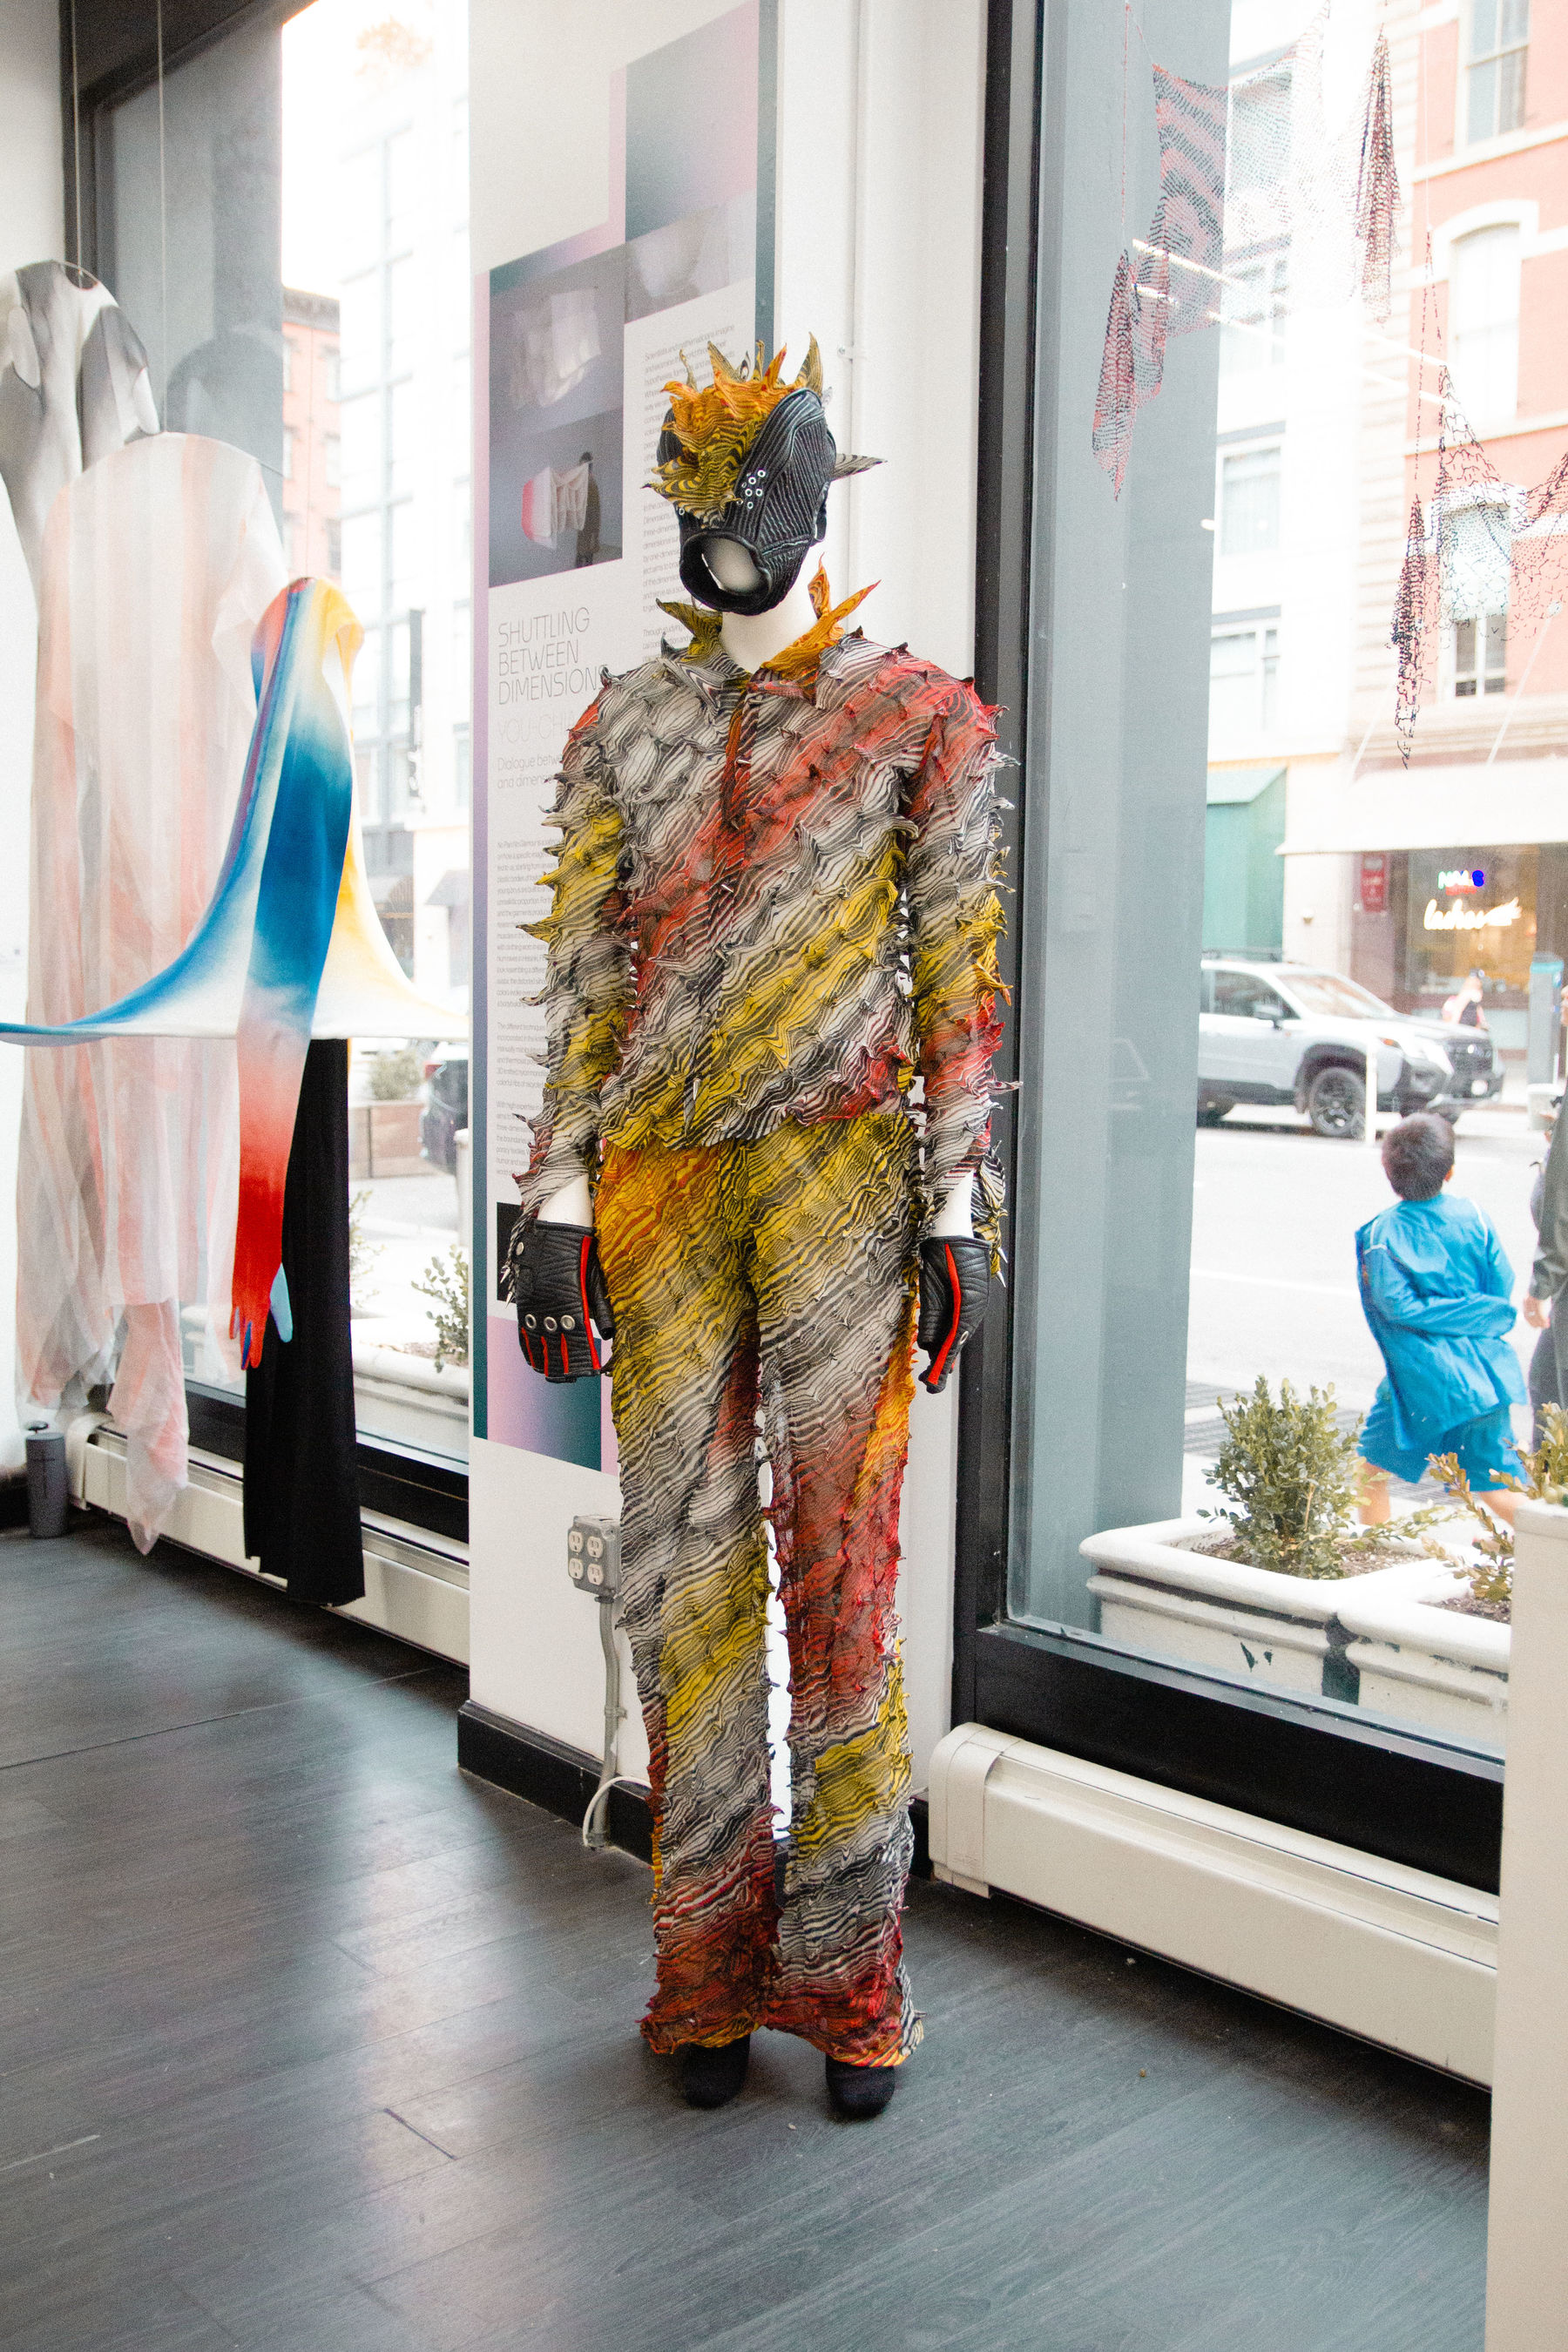 A very colourful garment on display by the window in the gallery in New York